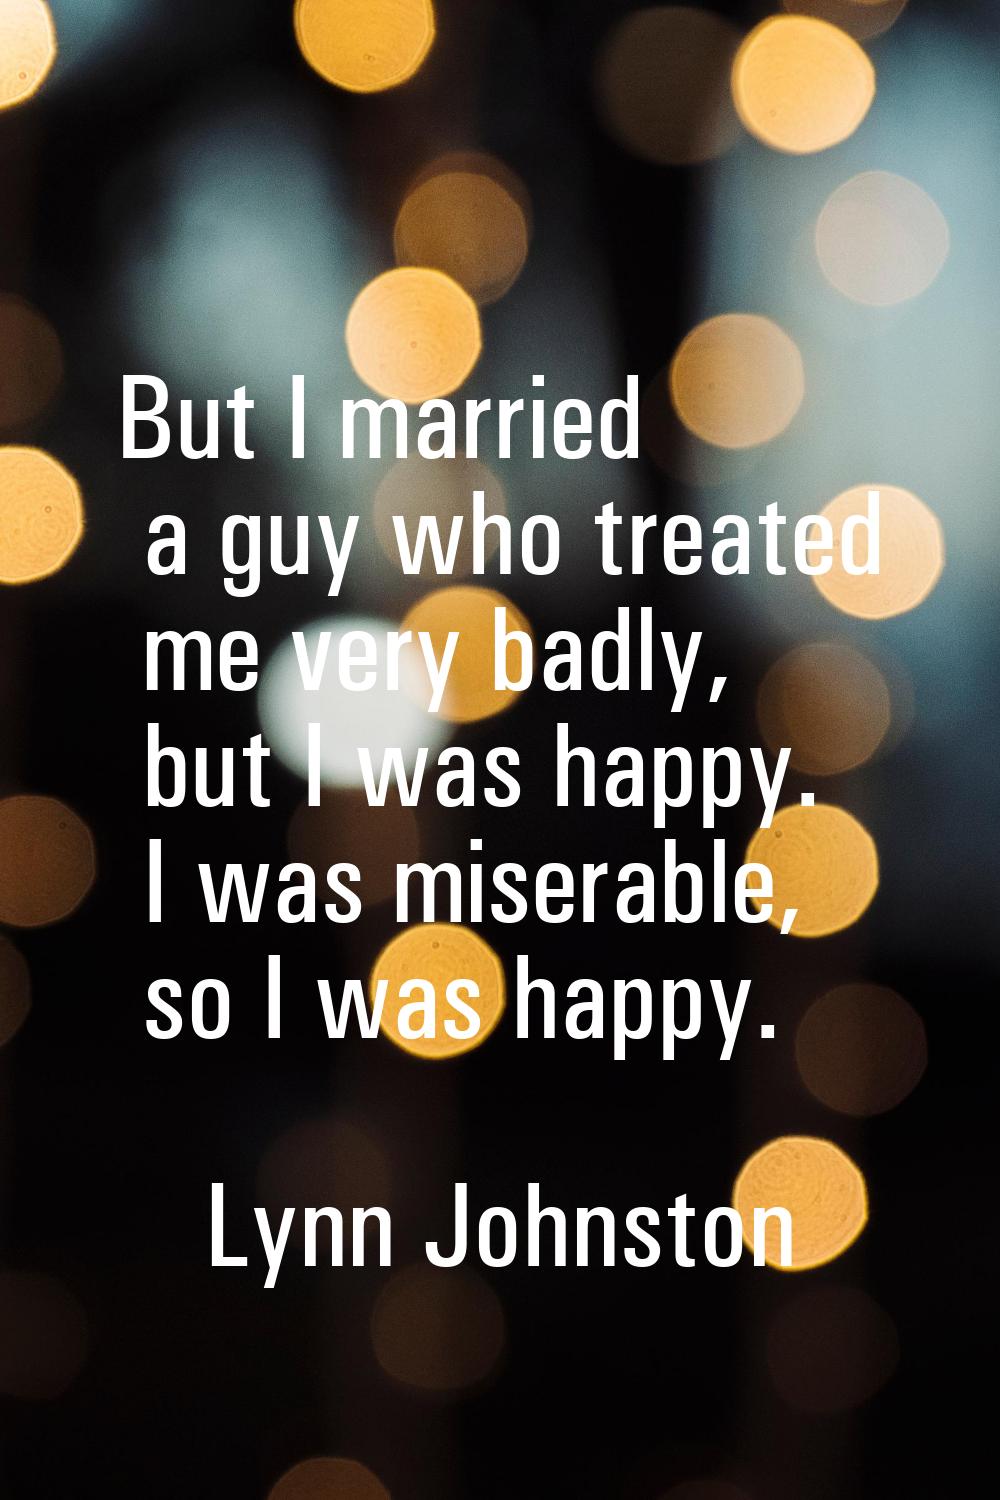 But I married a guy who treated me very badly, but I was happy. I was miserable, so I was happy.